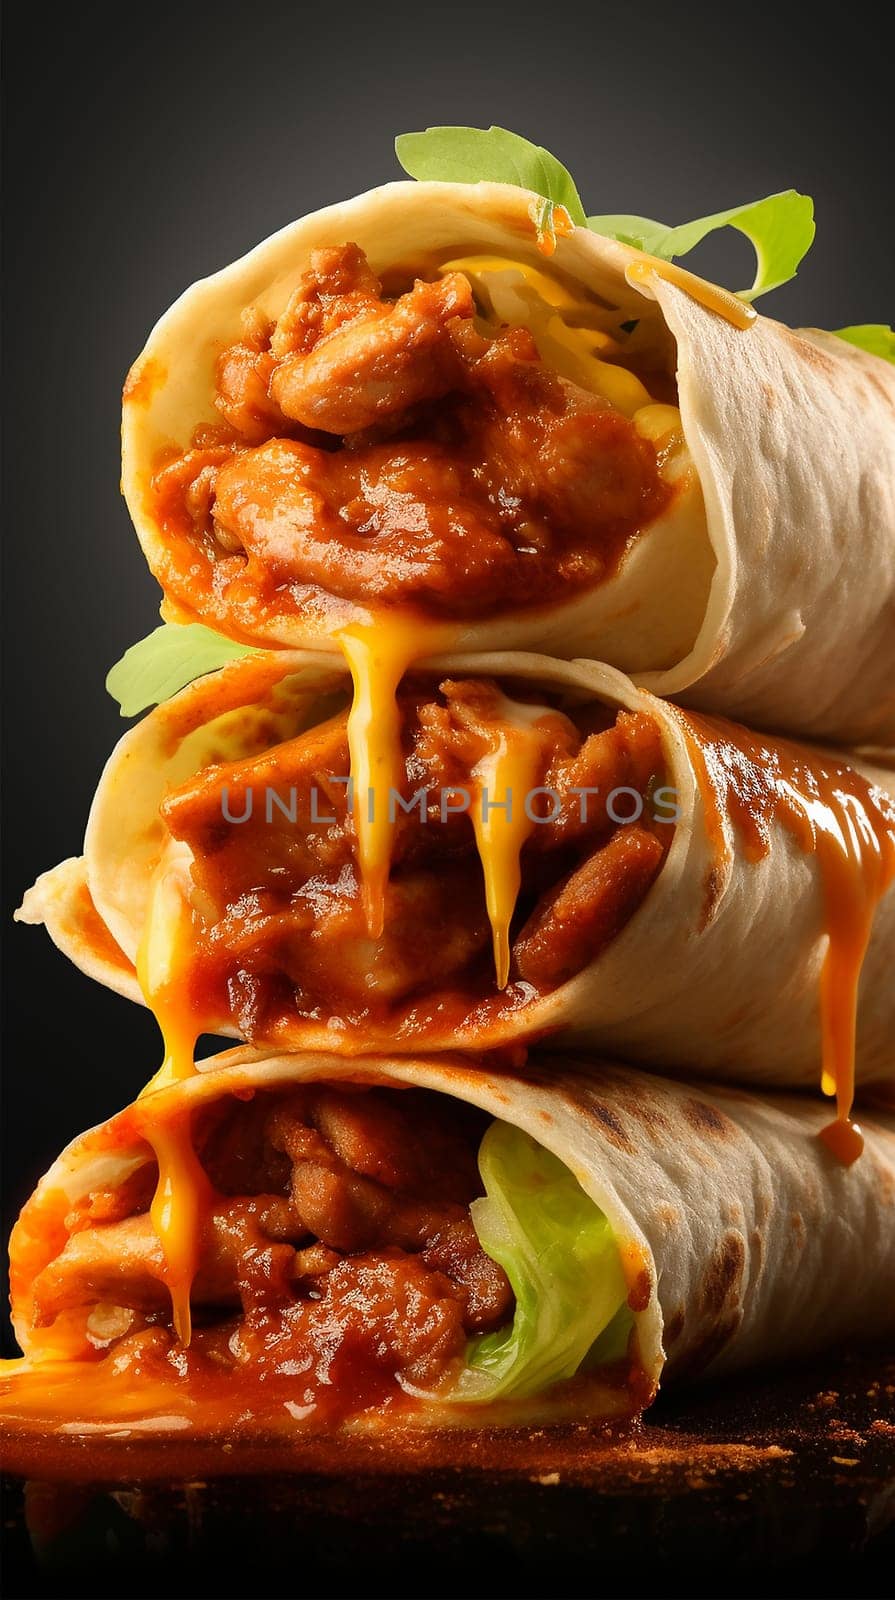 Burritos wraps with beef and vegetables on light background. Beef burrito, mexican food. Delicous food melted cheese grilled fast food